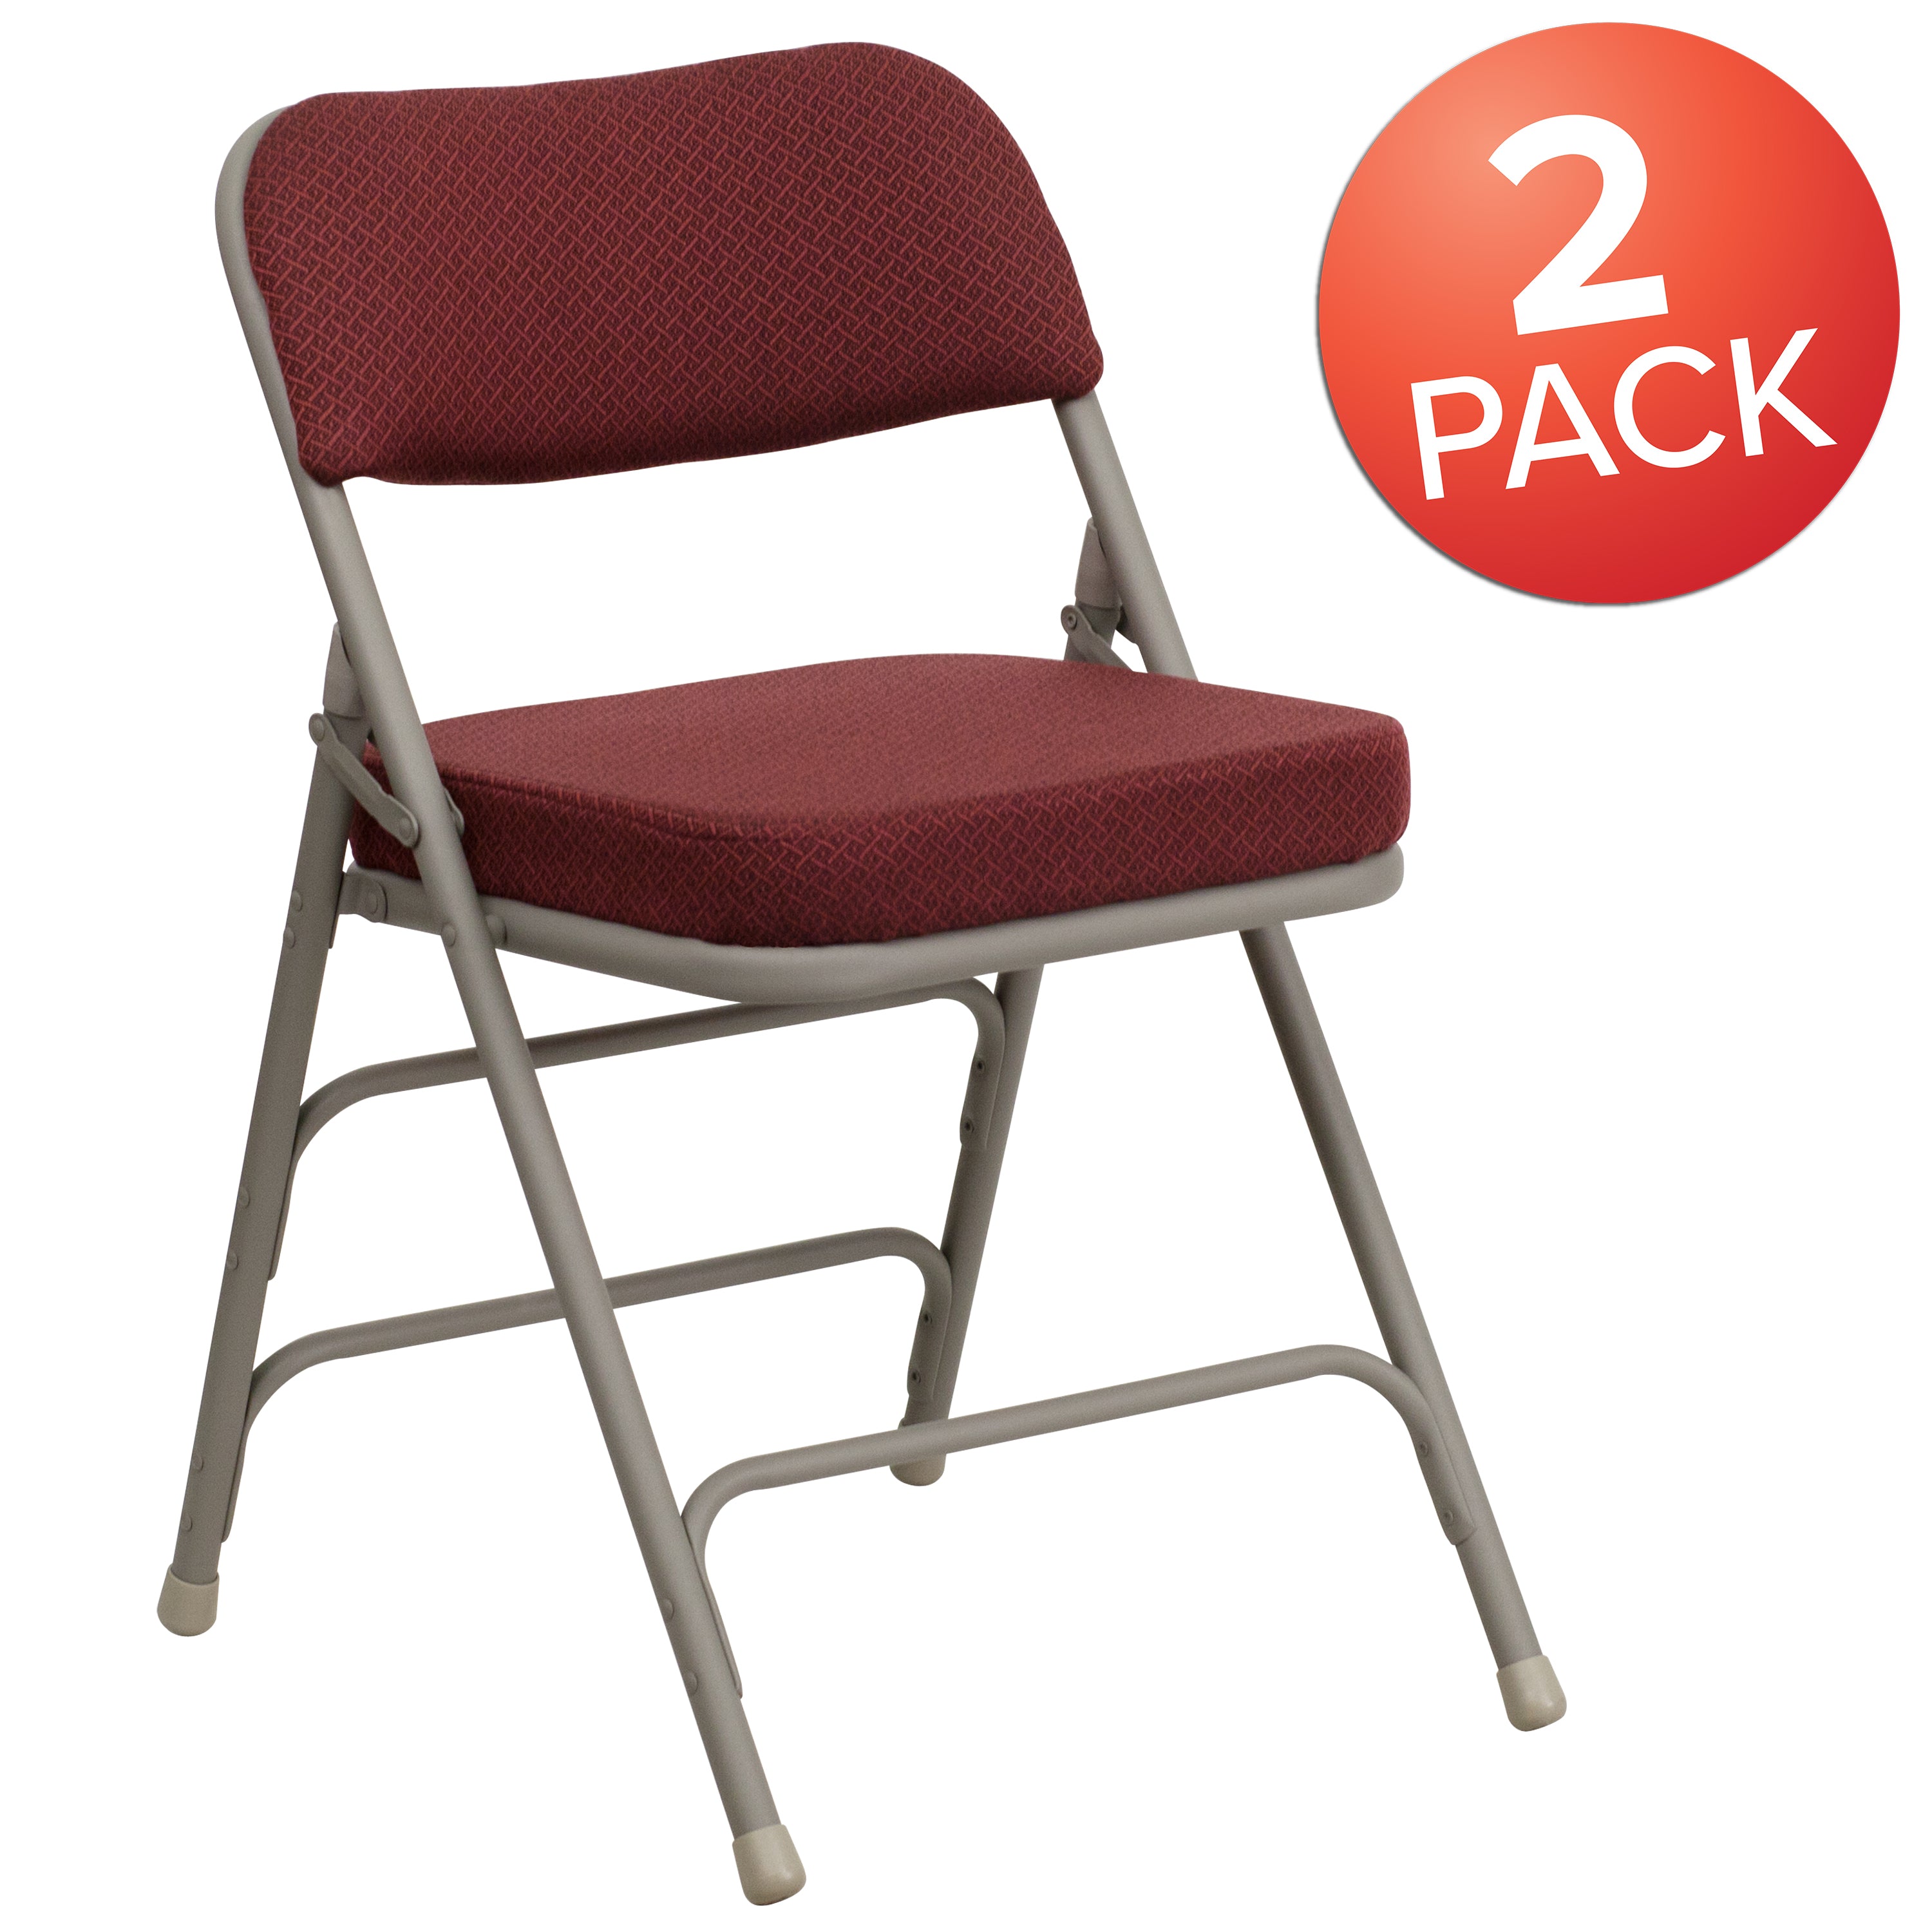 2 Pack HERCULES Series Premium Curved Triple Braced & Double Hinged Fabric Upholstered Metal Folding Chair-Metal Folding Chair-Flash Furniture-Wall2Wall Furnishings